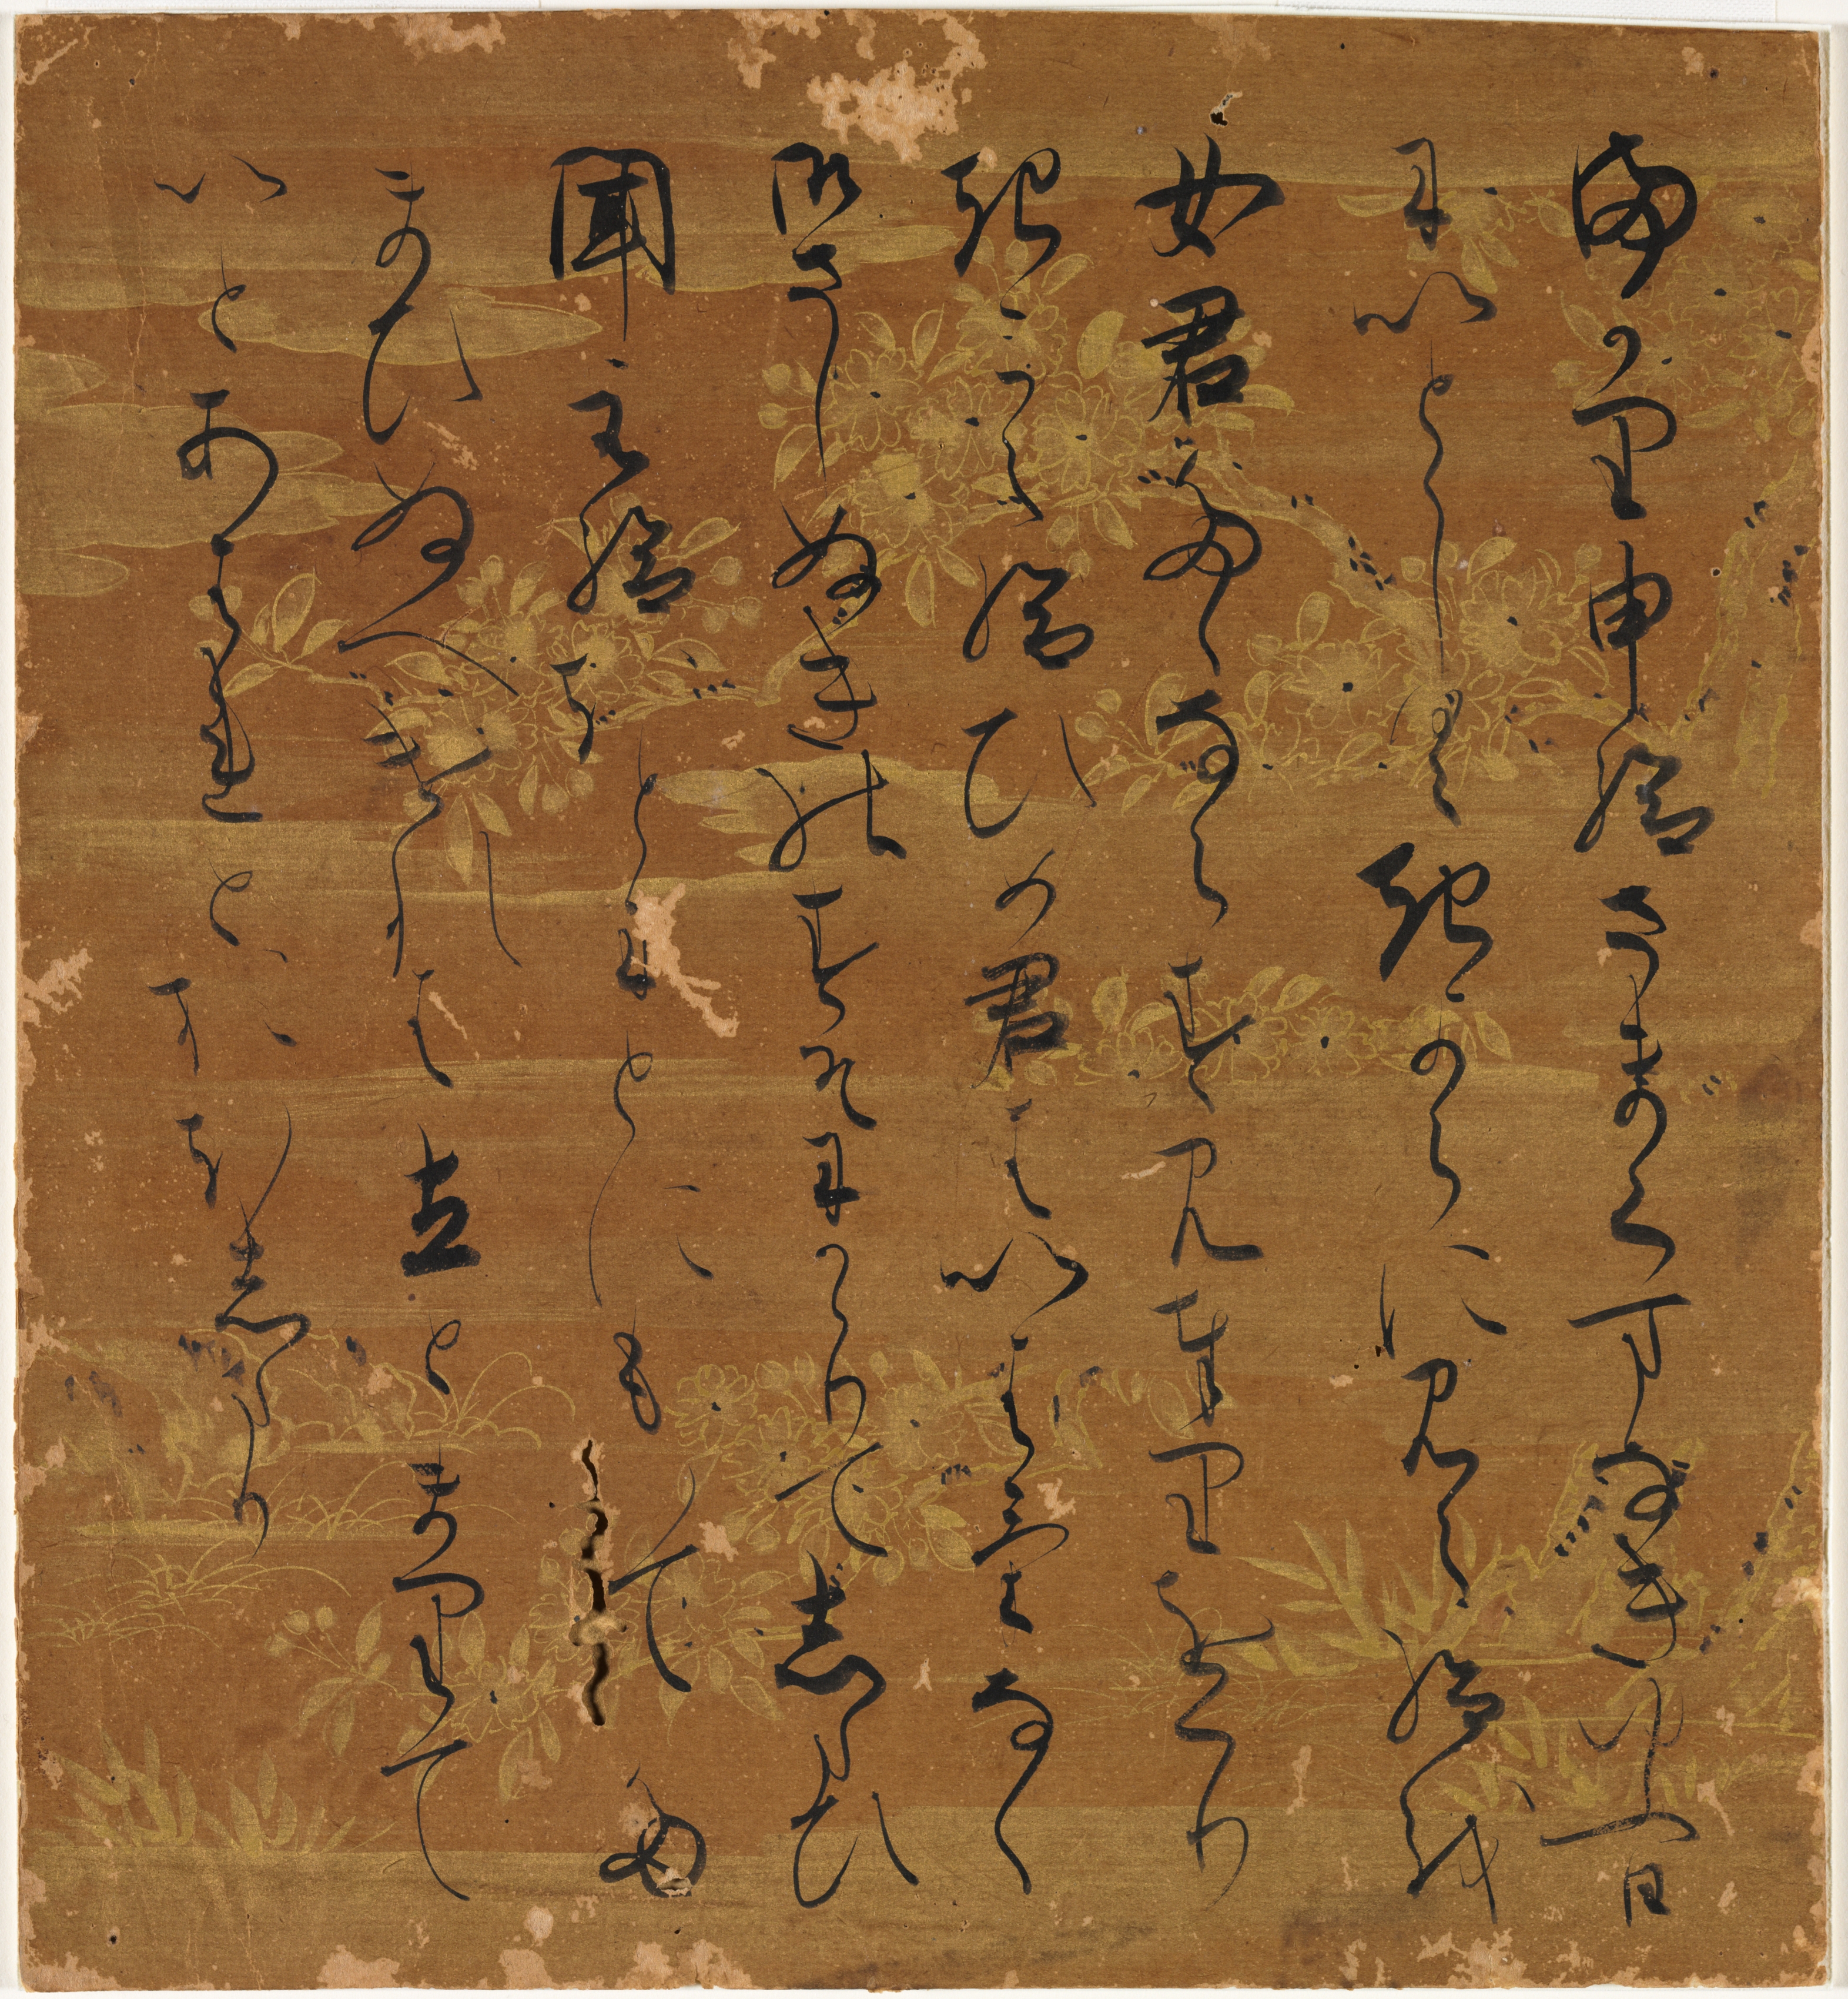 Portion of Text from the "Wisps of Cloud" (Usugumo) Chapter of The Tale of Genji